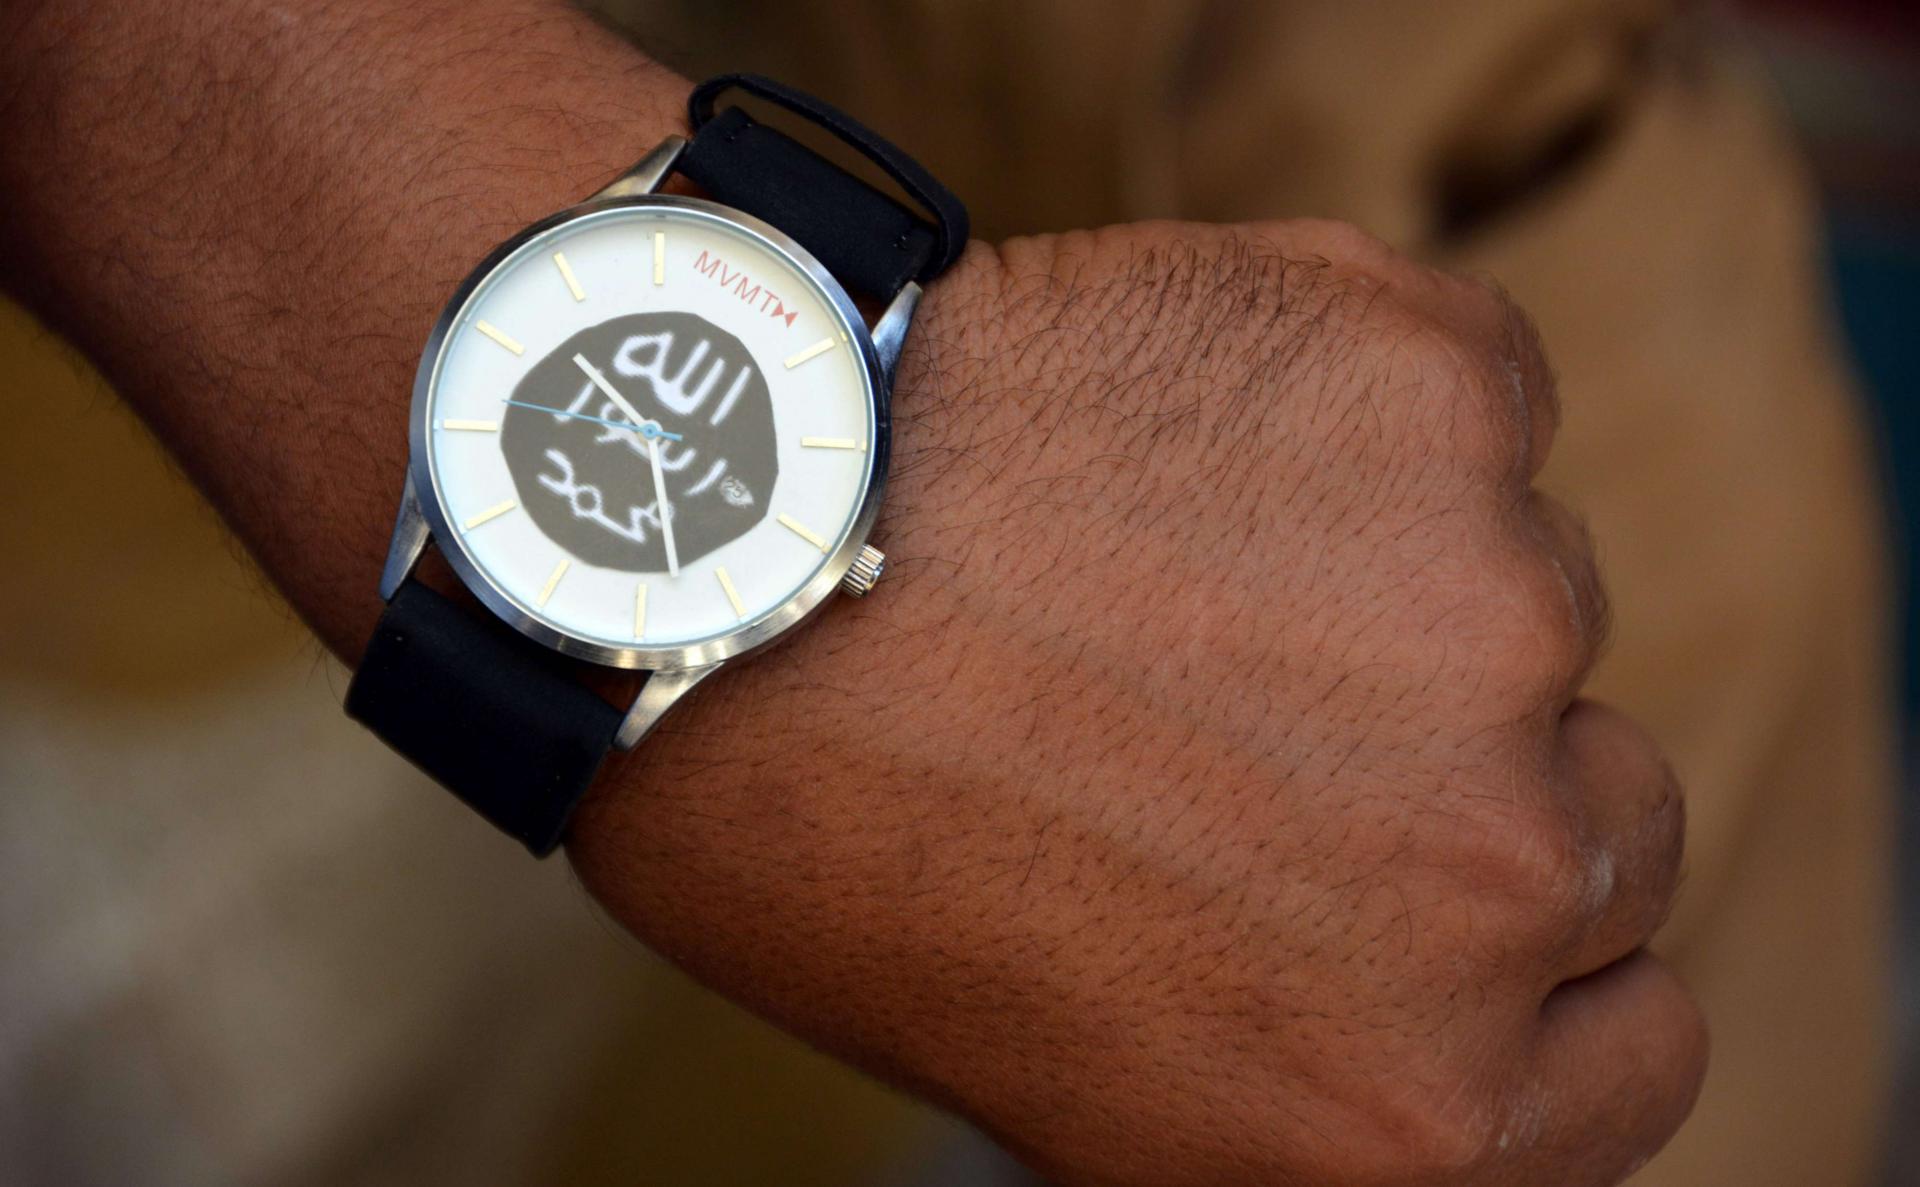 A member of the Iraqi special forces puts on a watch belonging to a former Islamic State (IS) group fighter, bearing the group's logo, found by security forces in the Old City of Mosul, in the city's western industrial district on June 29, 2017.